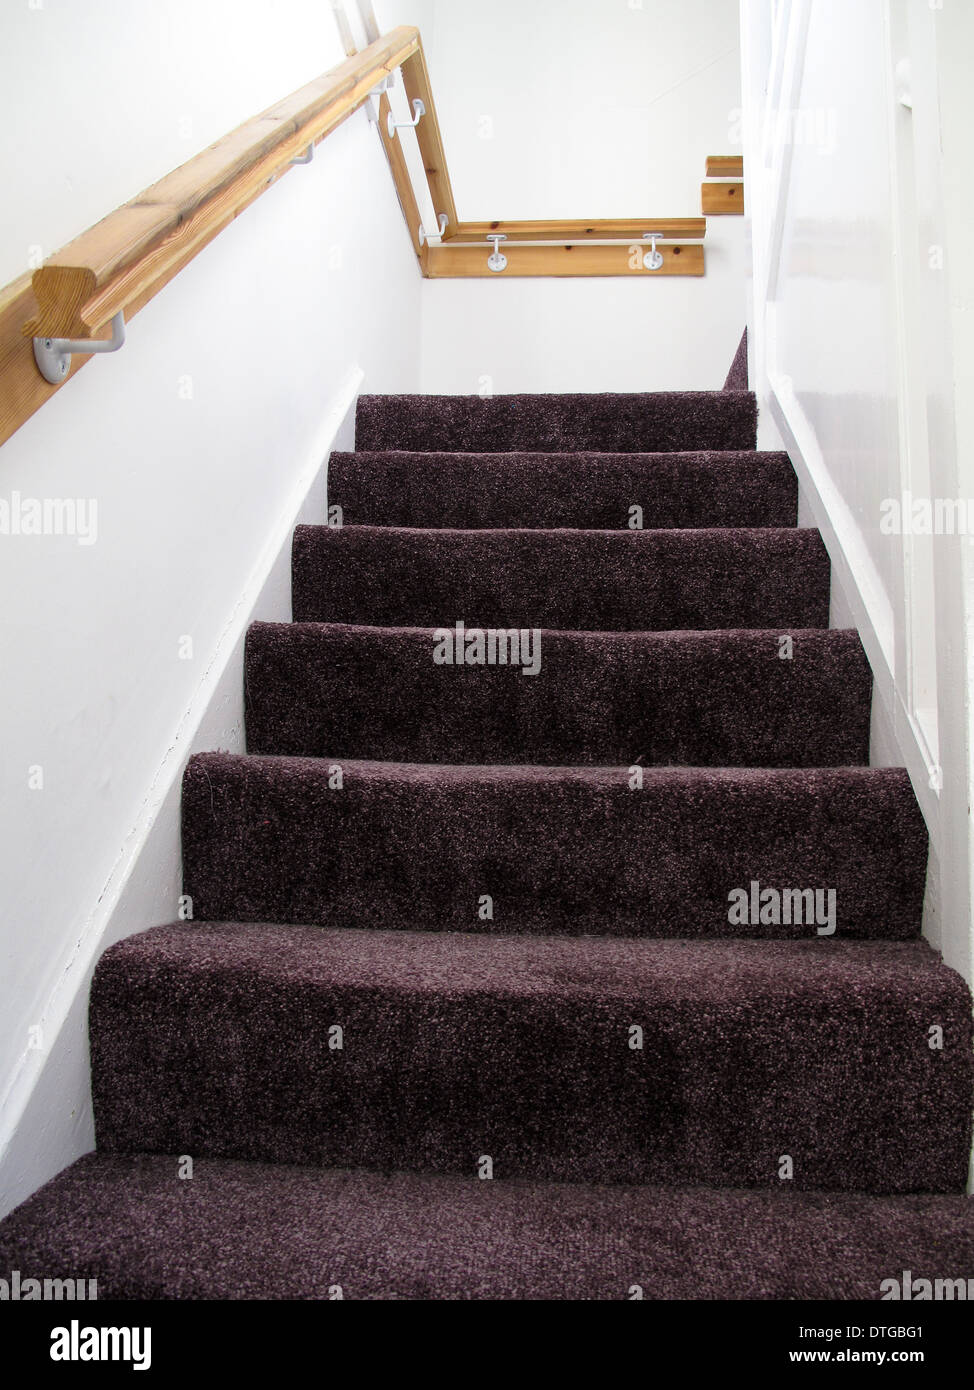 Domestic carpeted stair Stock Photo